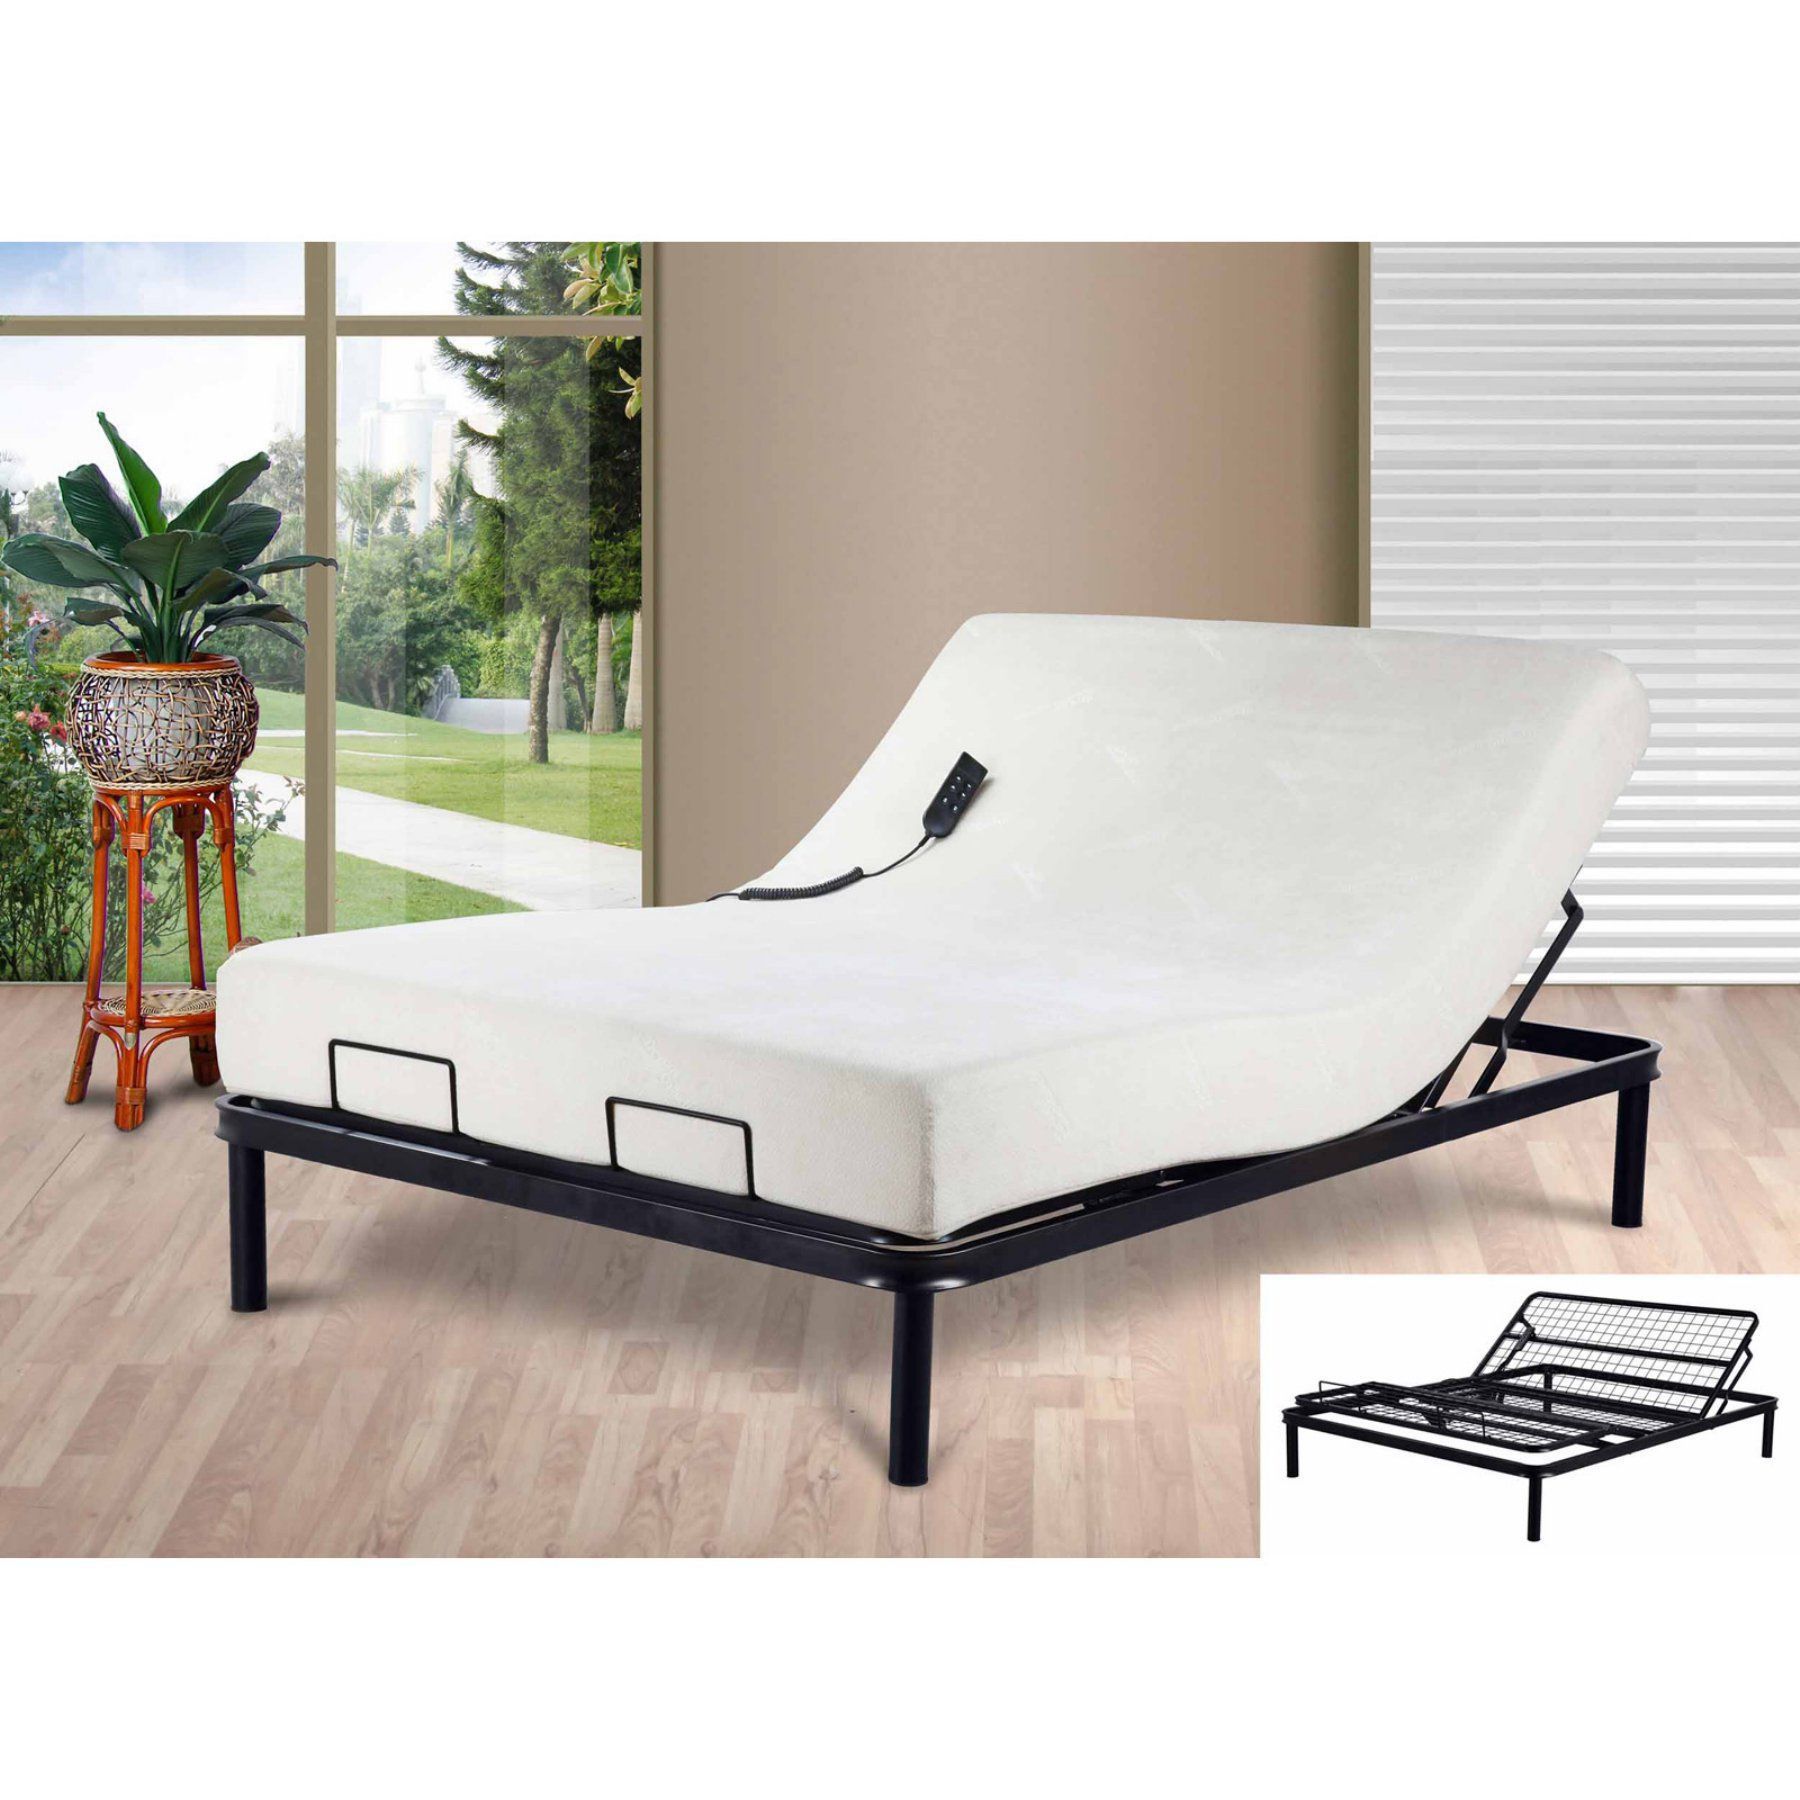 Primo adjustable queen sized bed with memory foam mattress and leather frame